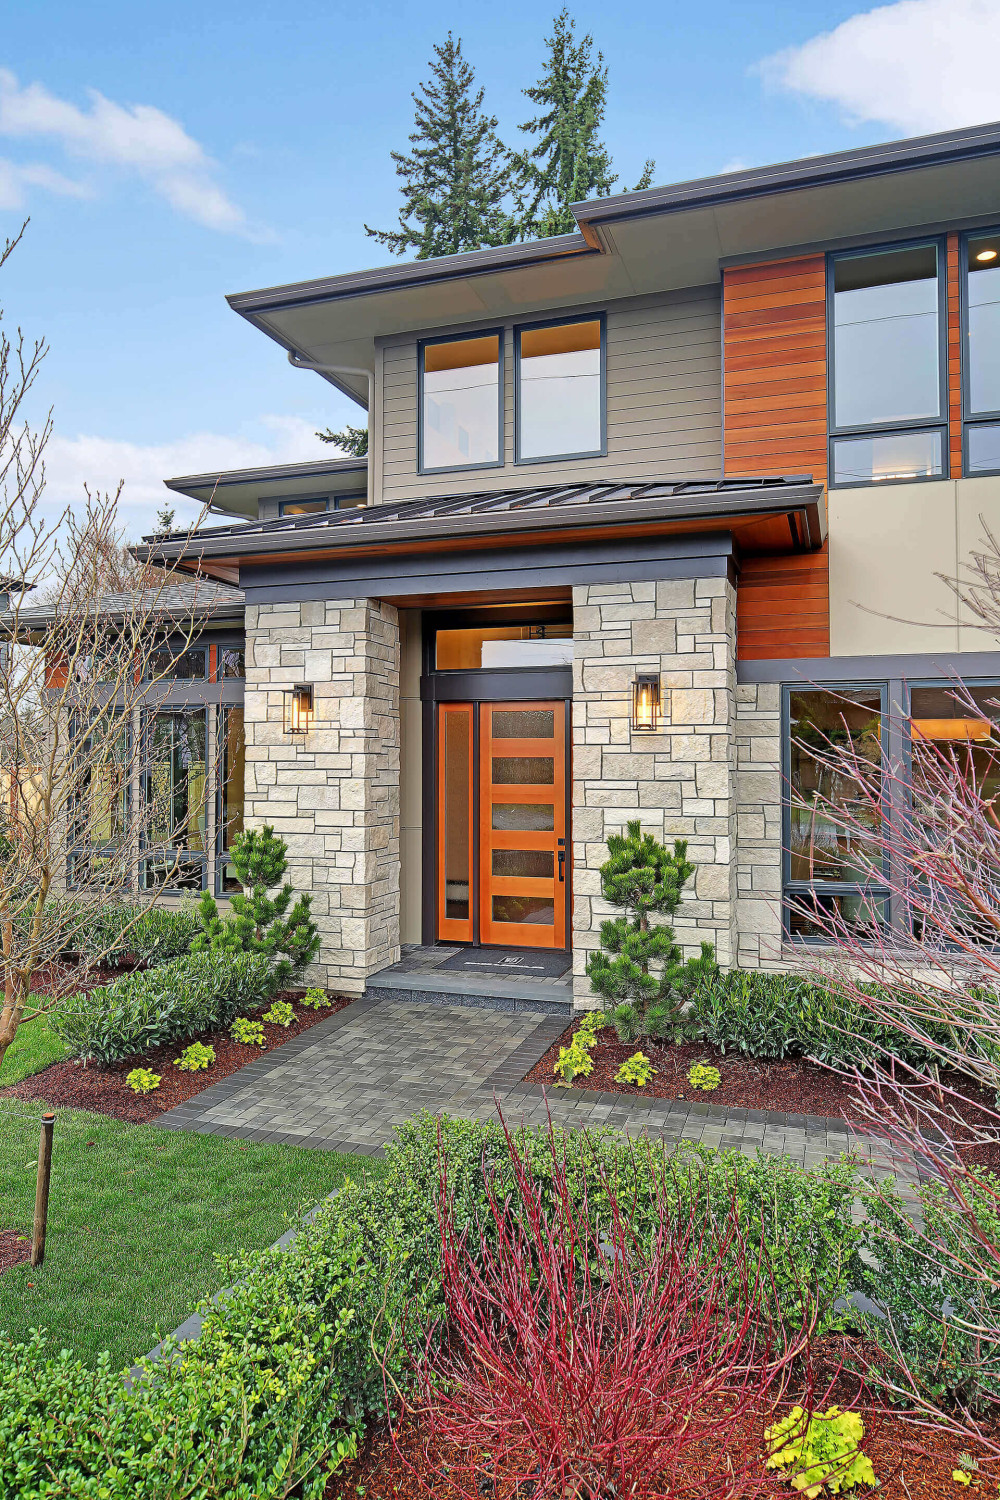 Photo #3 in the Exterior Photos gallery for the Belvedere - Lot 3 home